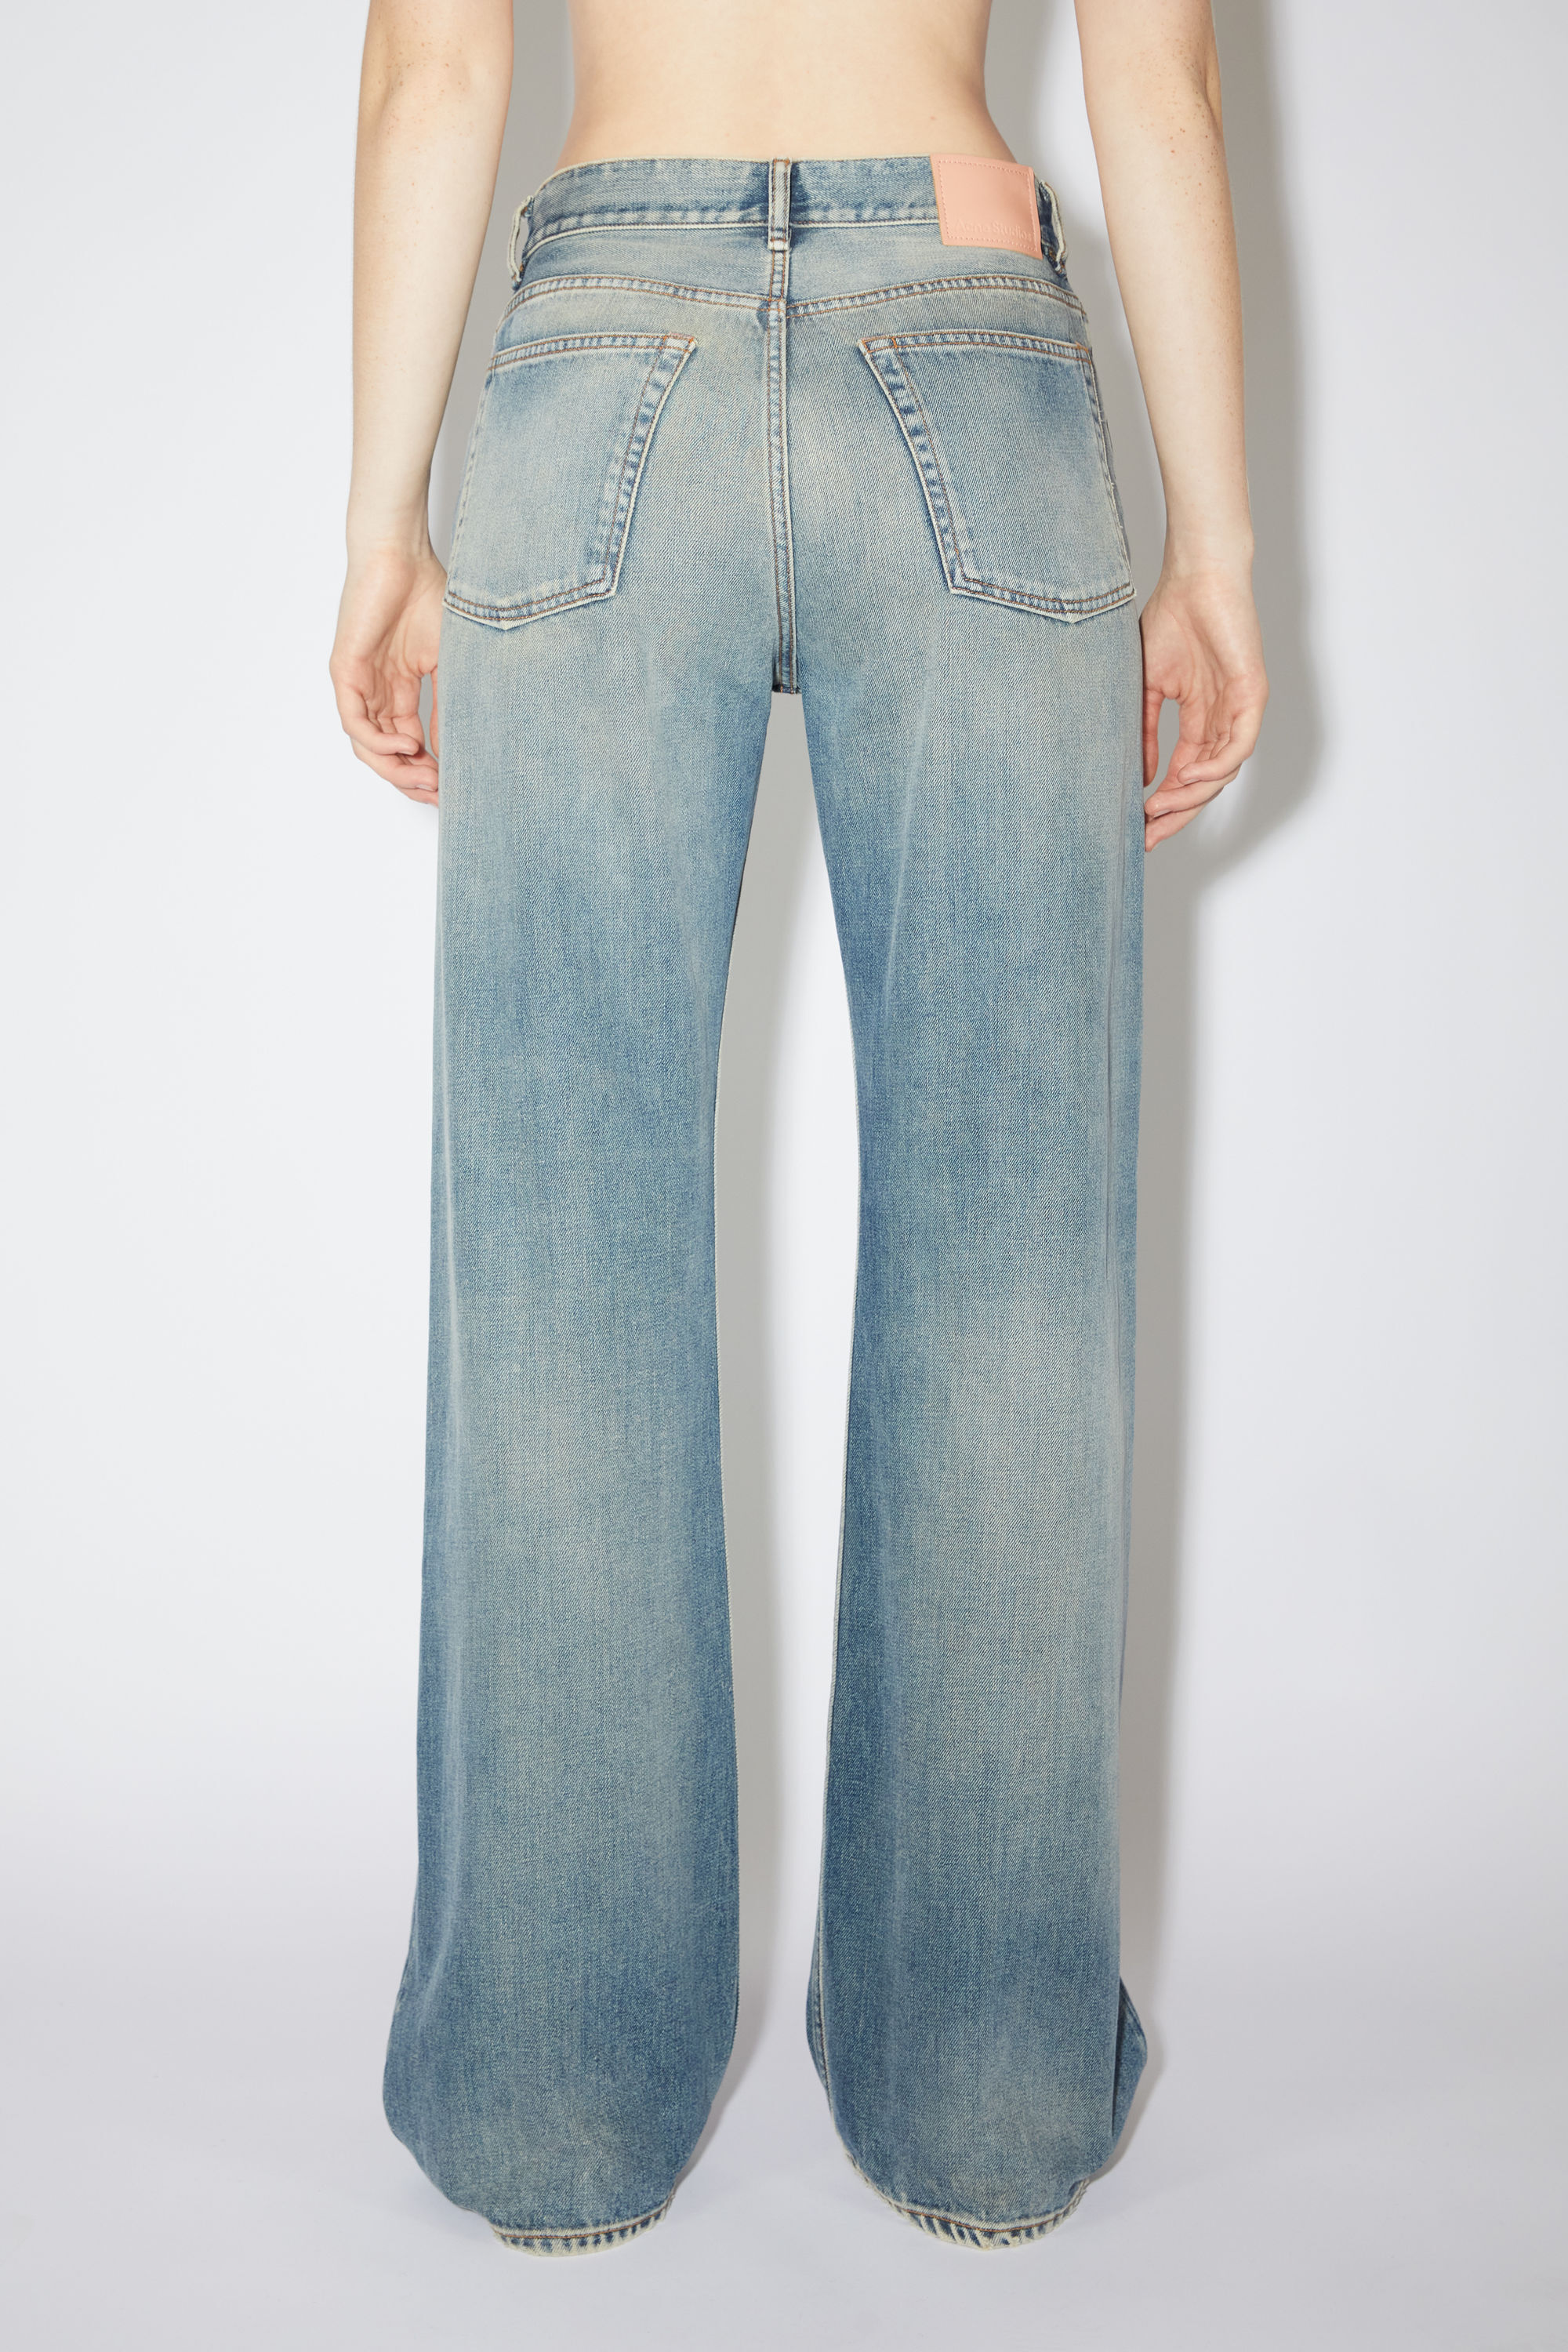 Acne Studios - Loose fit jeans - 2021F - Mid Blue